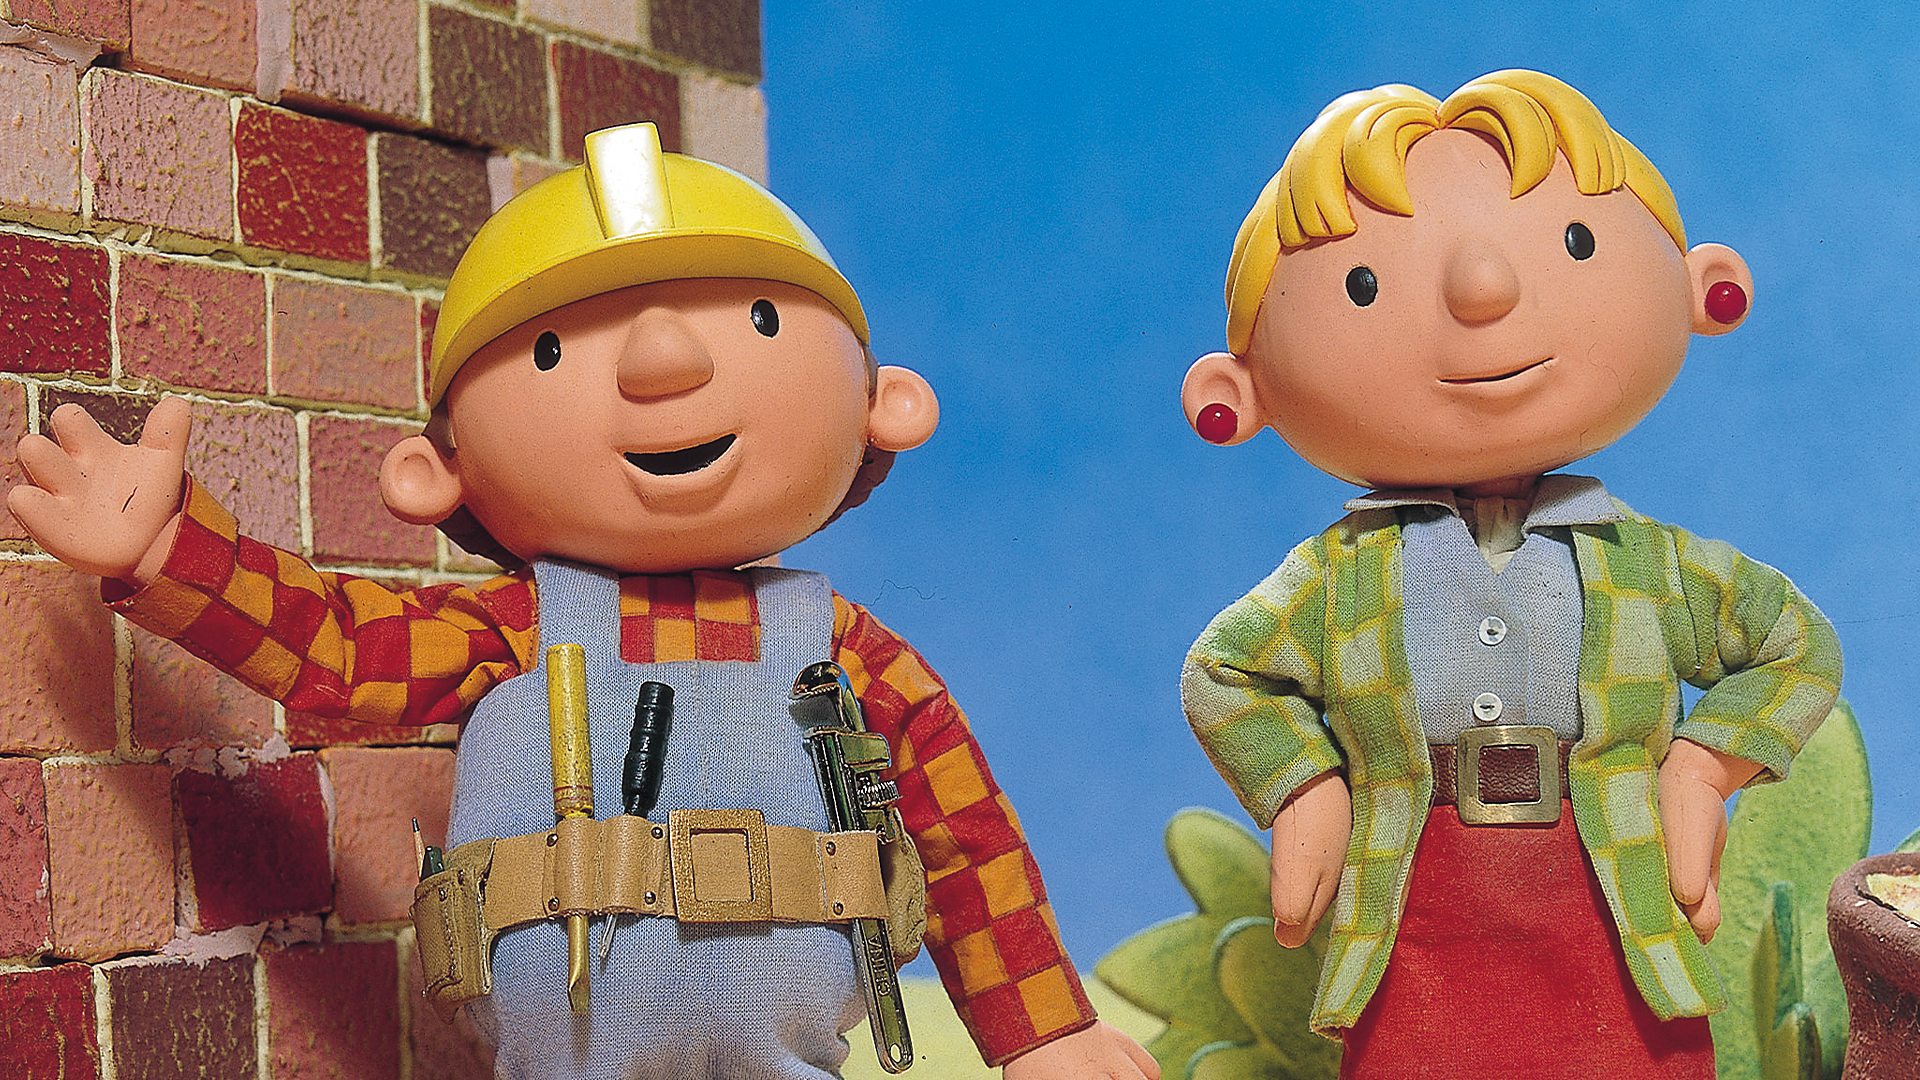 Bob The Builder Best Of Bob The Builder The Machines